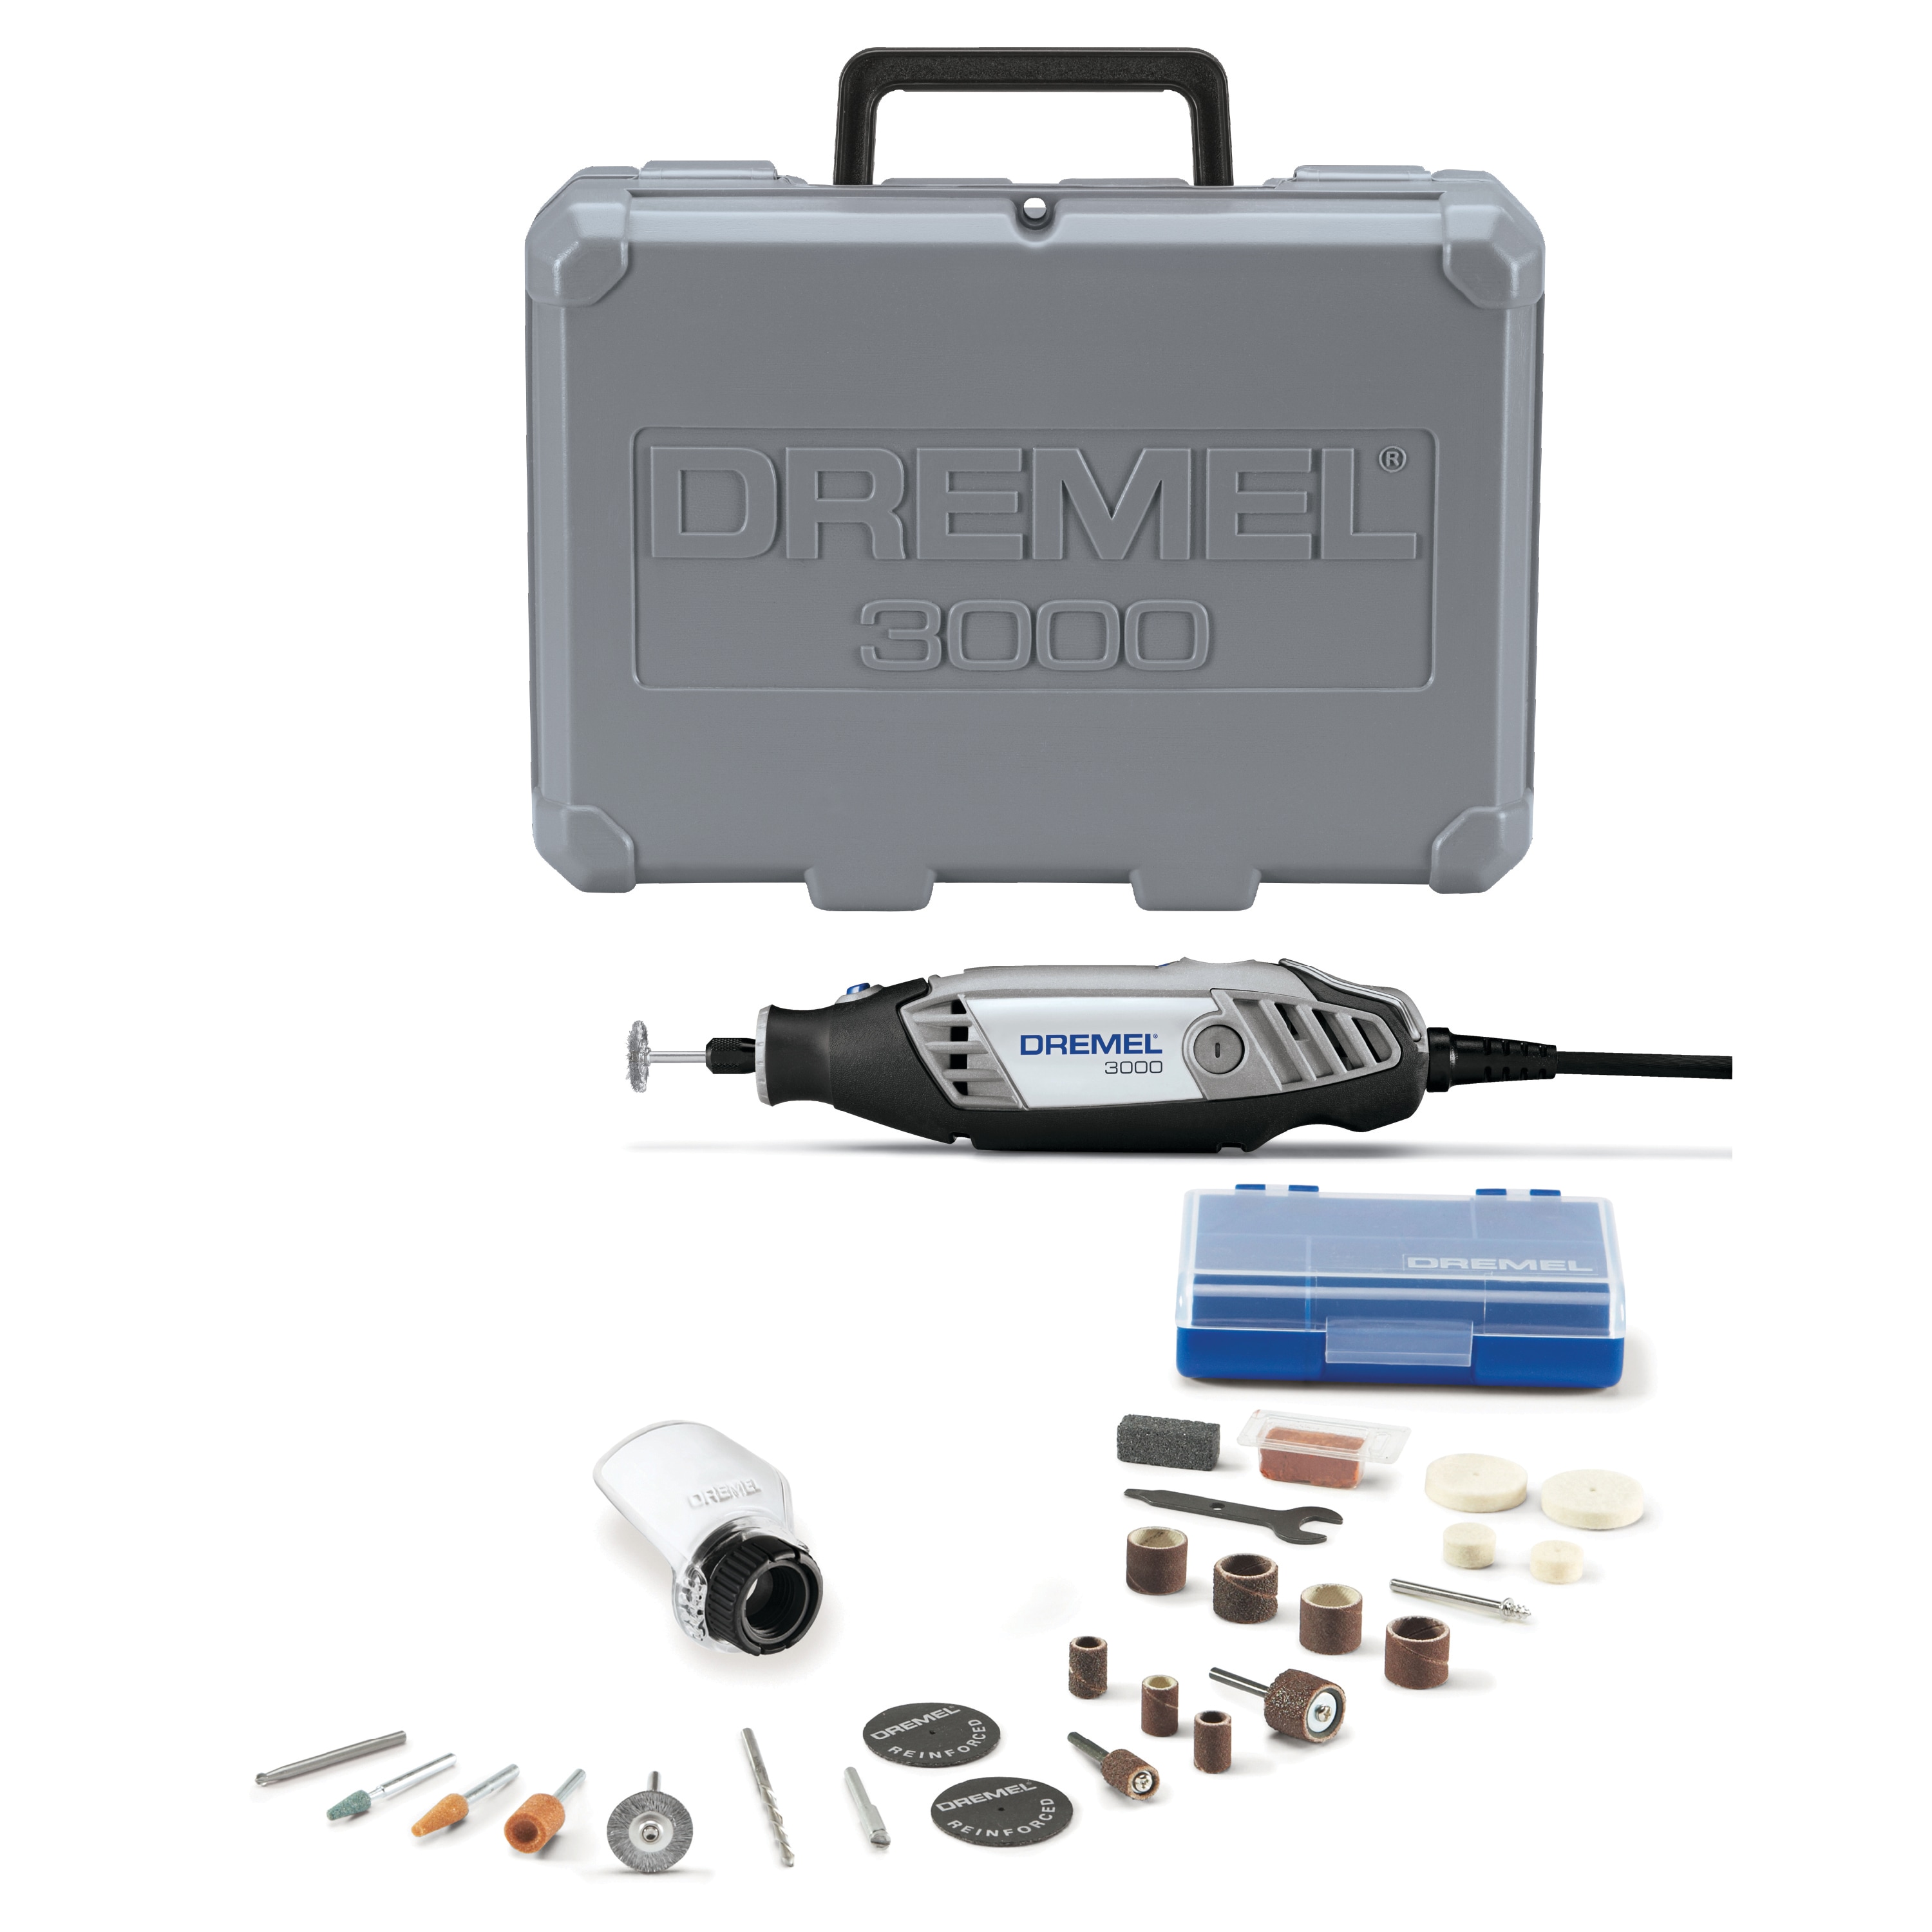 Dremel 3000 28-Piece Variable Speed Corded 1.2-Amp Multipurpose Rotary Tool with Hard Case